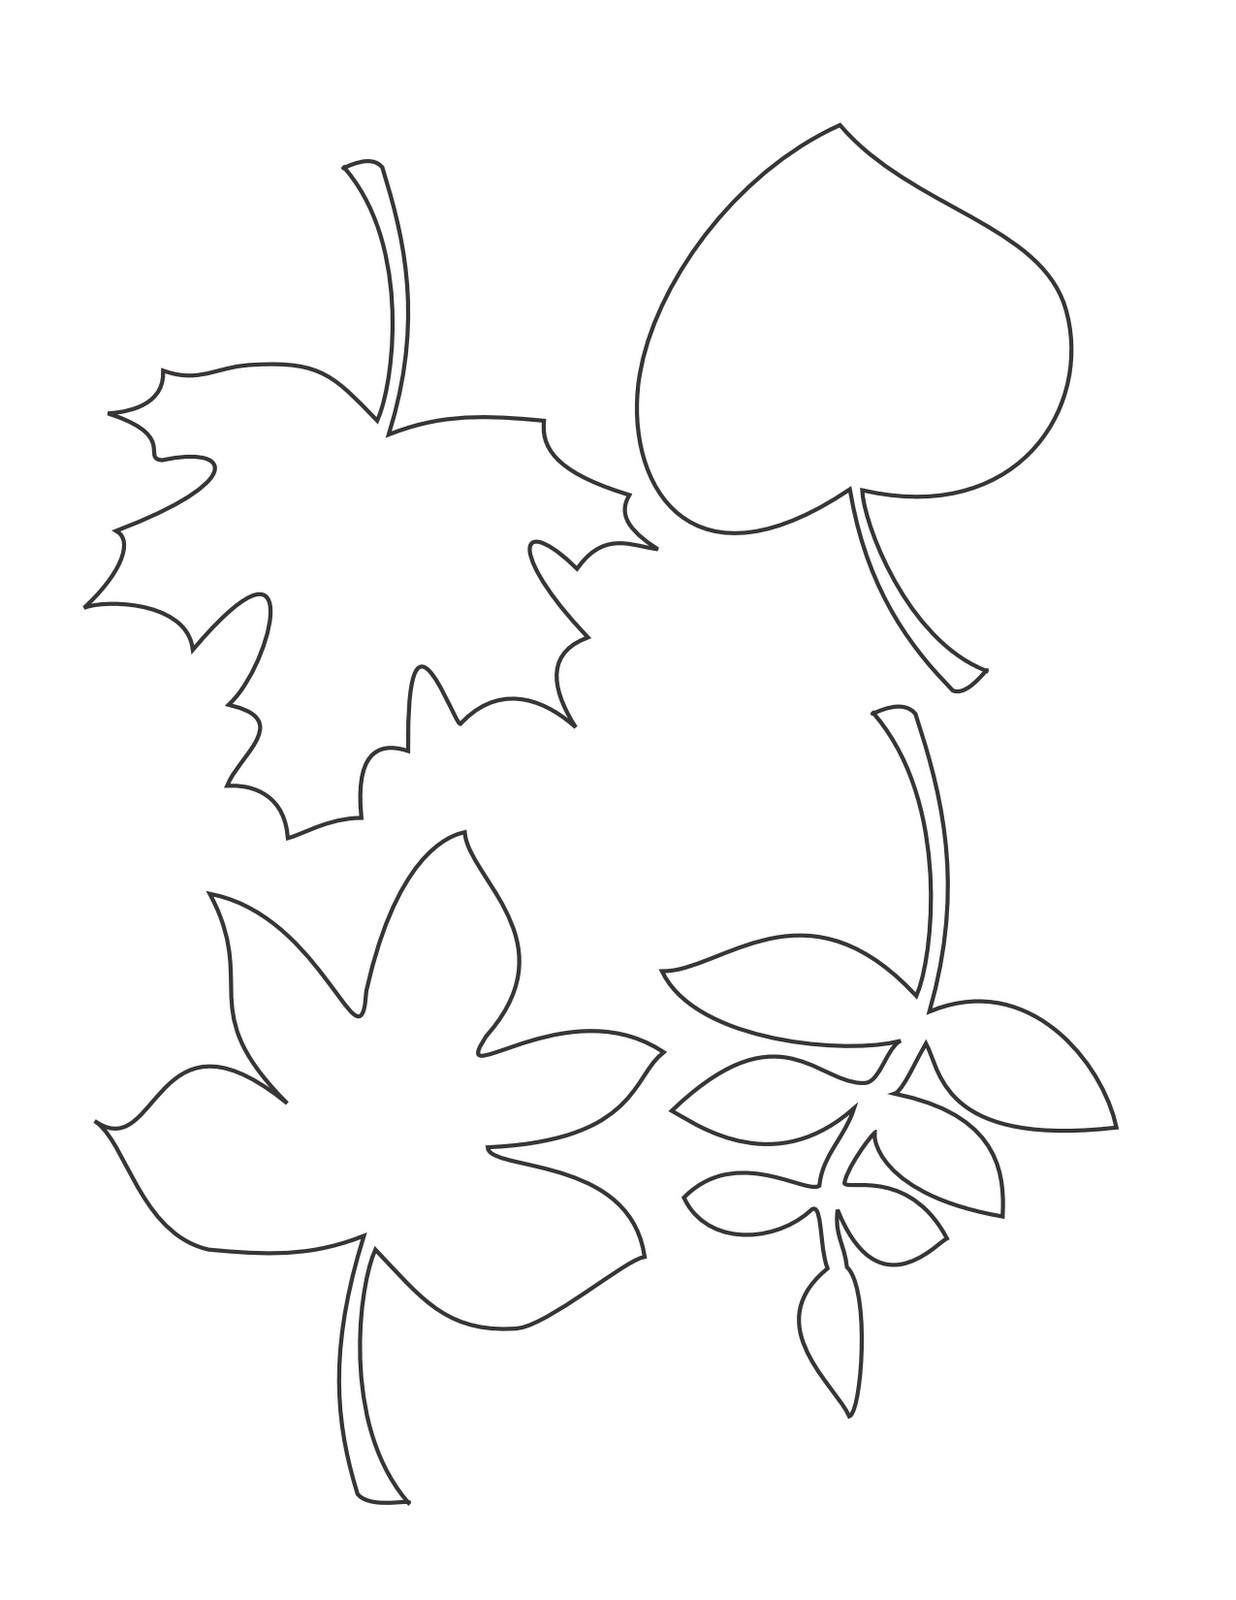 Autumn Leaves Coloring Pages
 Fall Leaves Coloring Pages coloringsuite